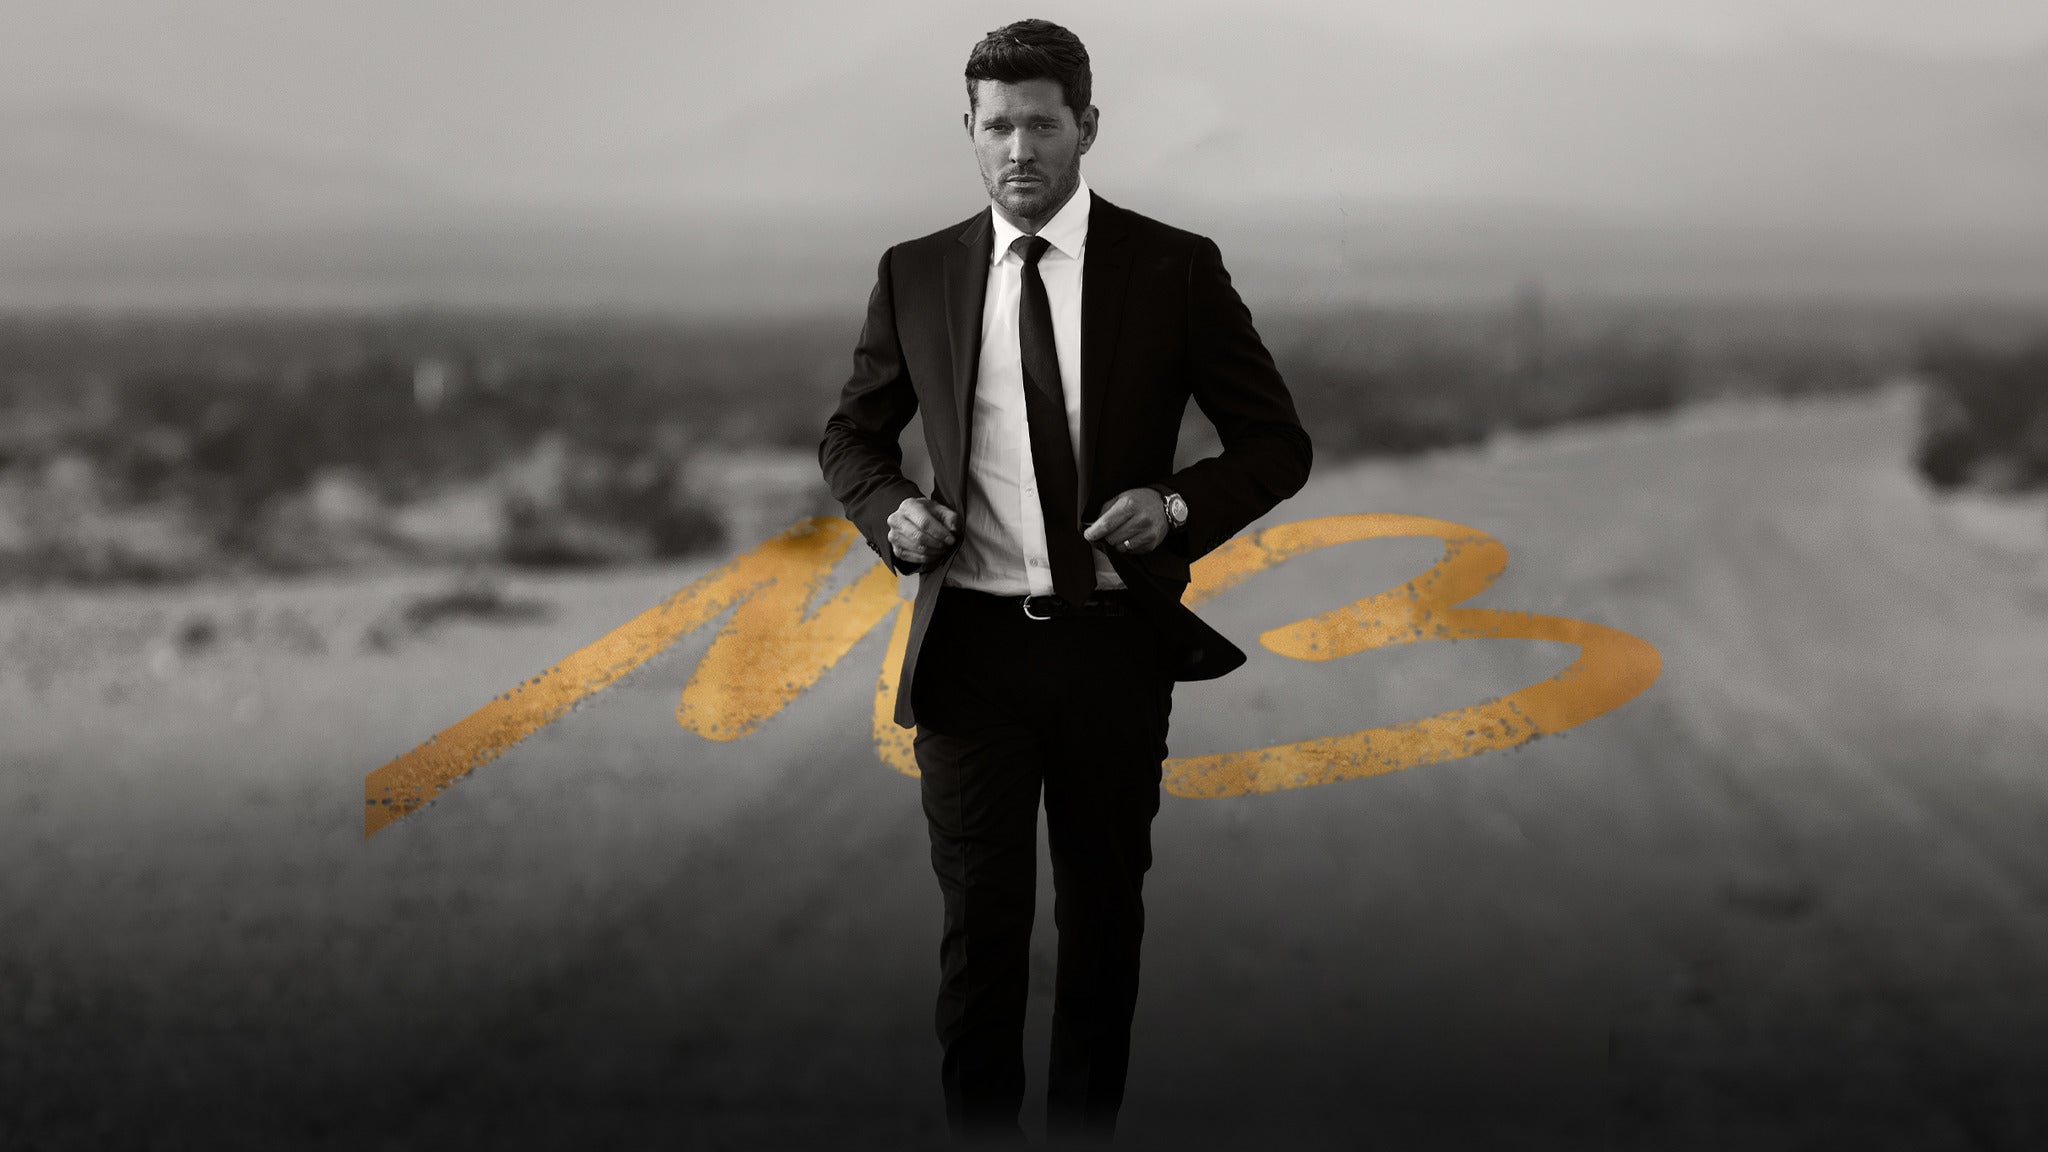 An Evening with Michael Bublé at Amalie Arena